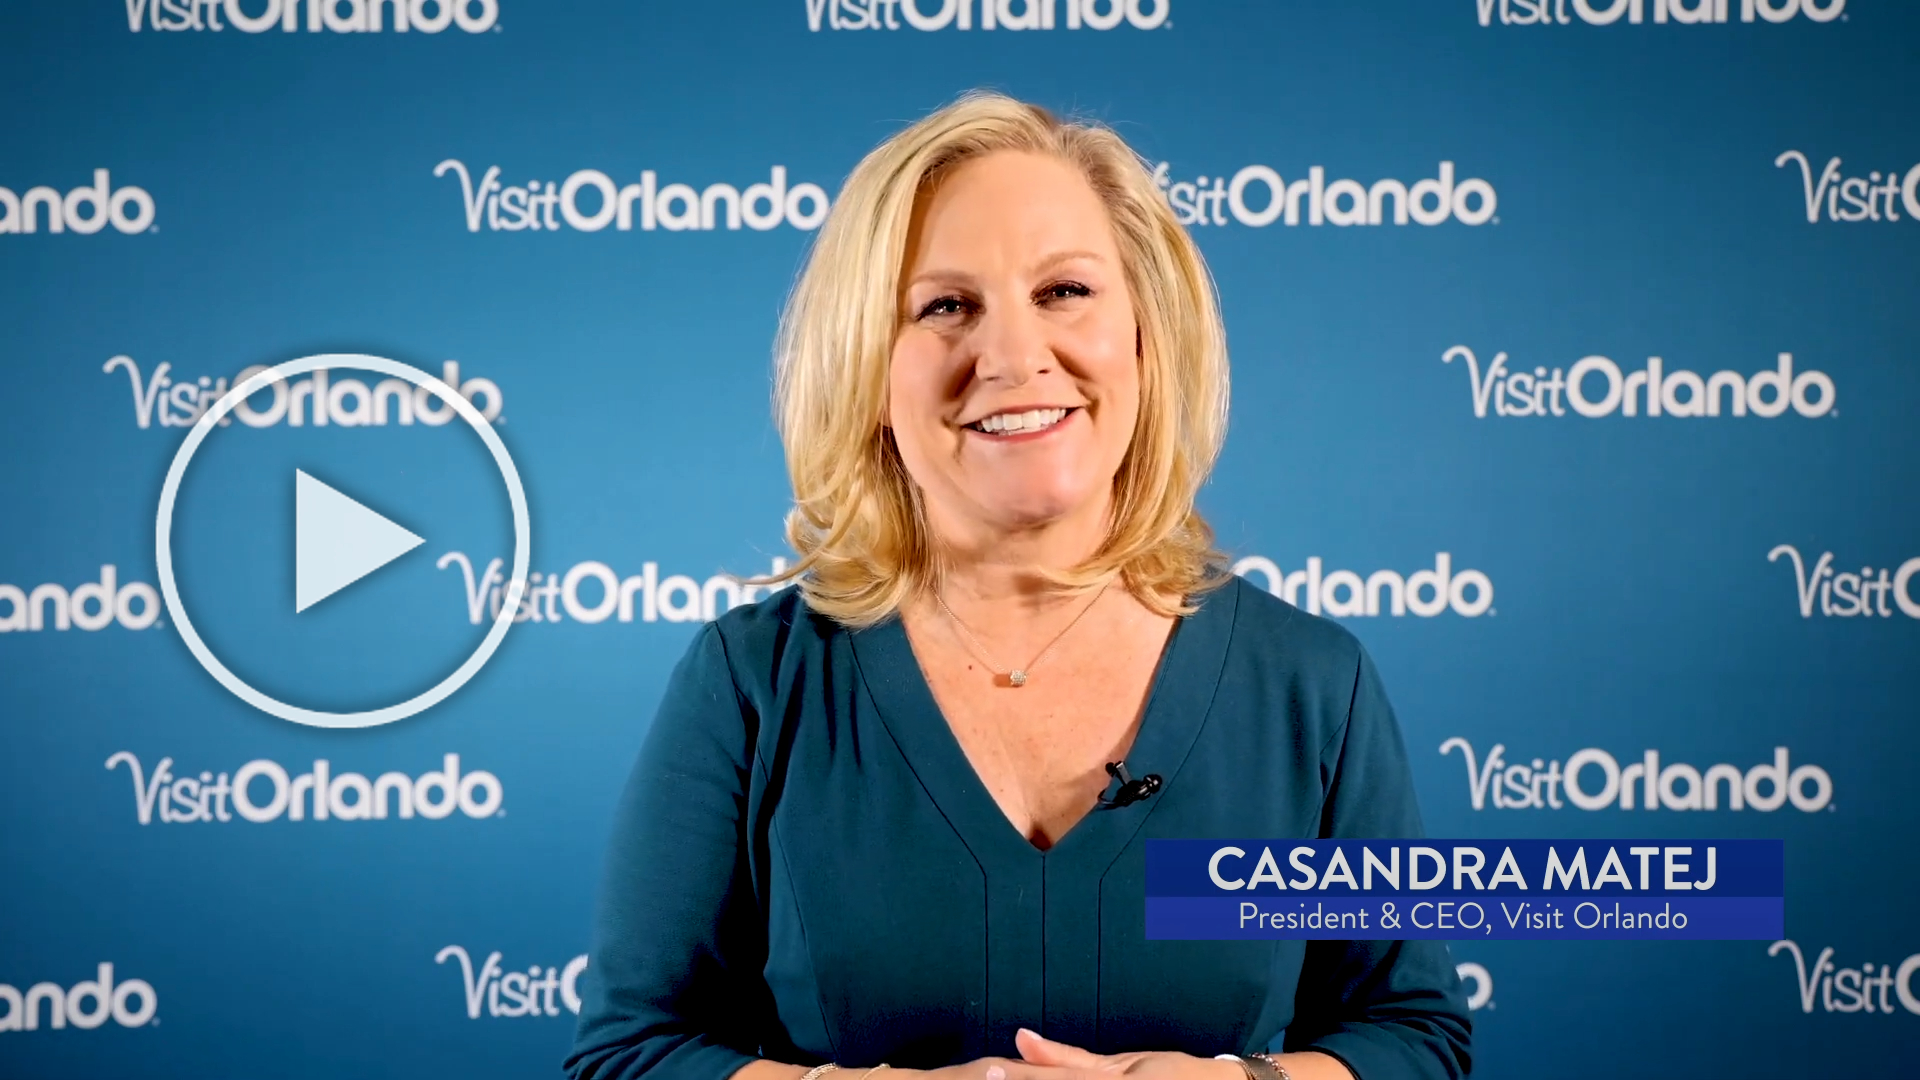 Feb. 1 marked Casandra Matej's one year anniversary as president and CEO of Visit Orlando